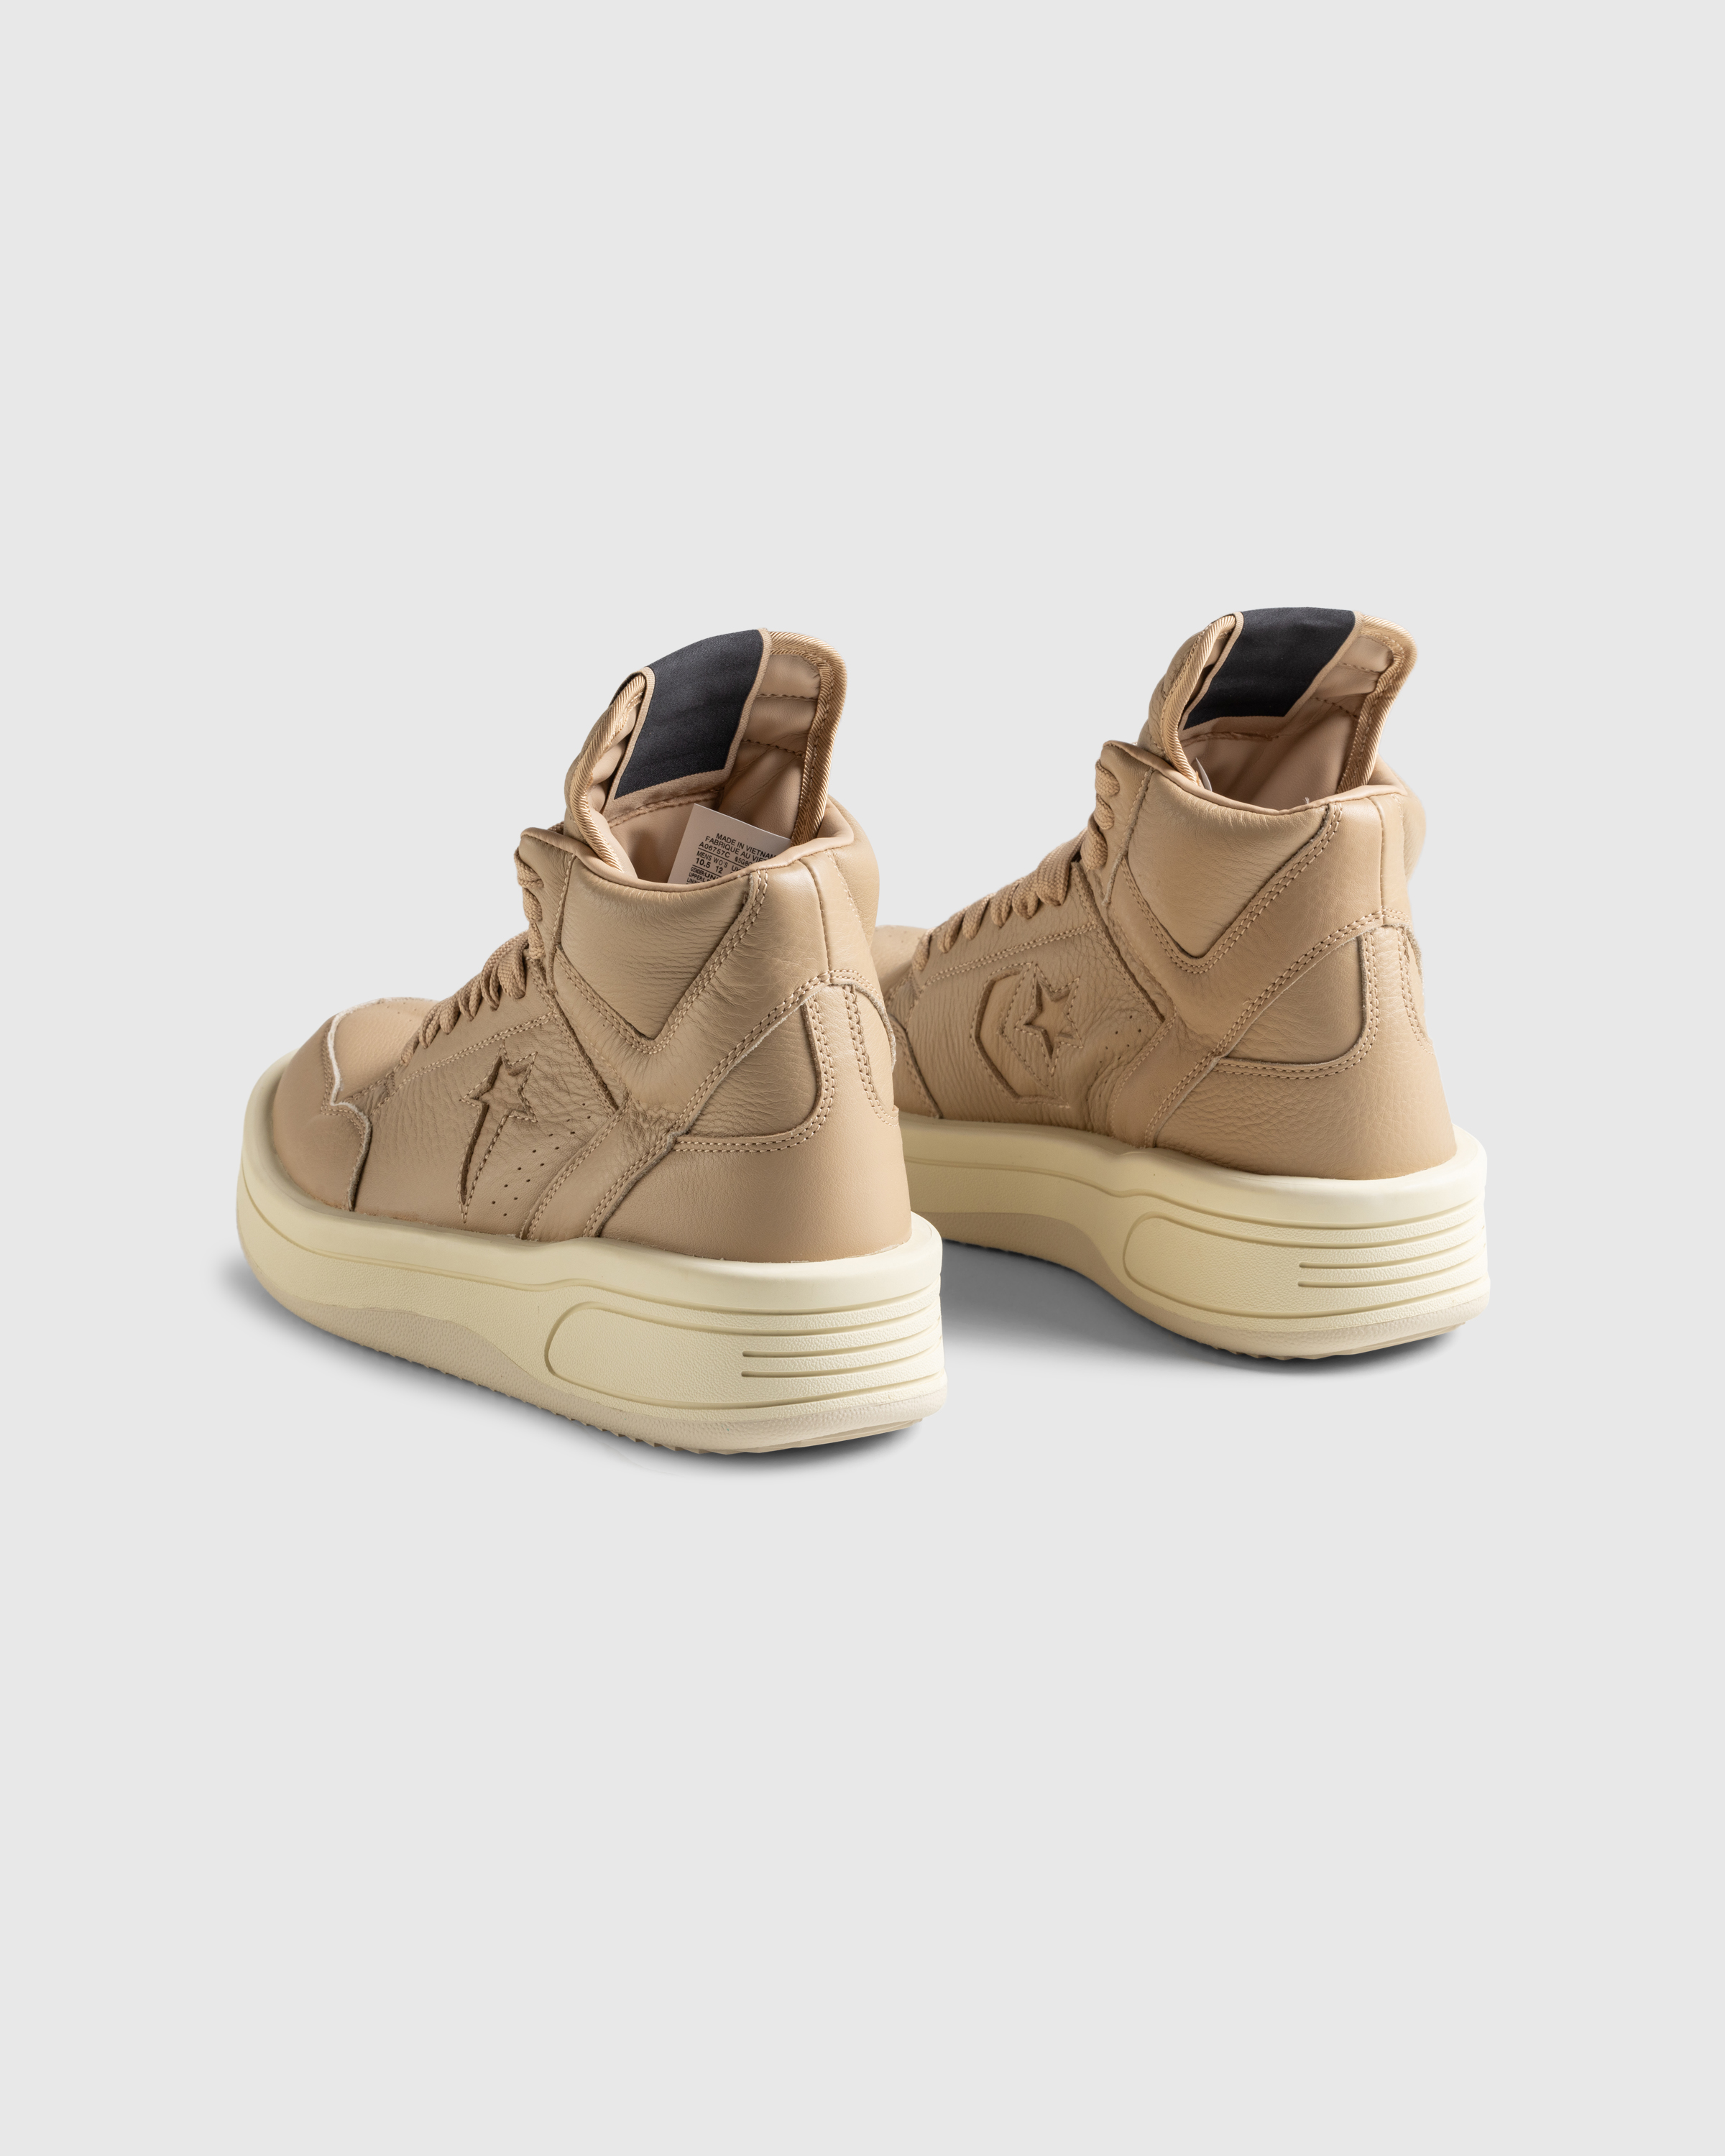 Rick Owens x Converse – TURBOWPN Cave  - High Top Sneakers - Brown - Image 4